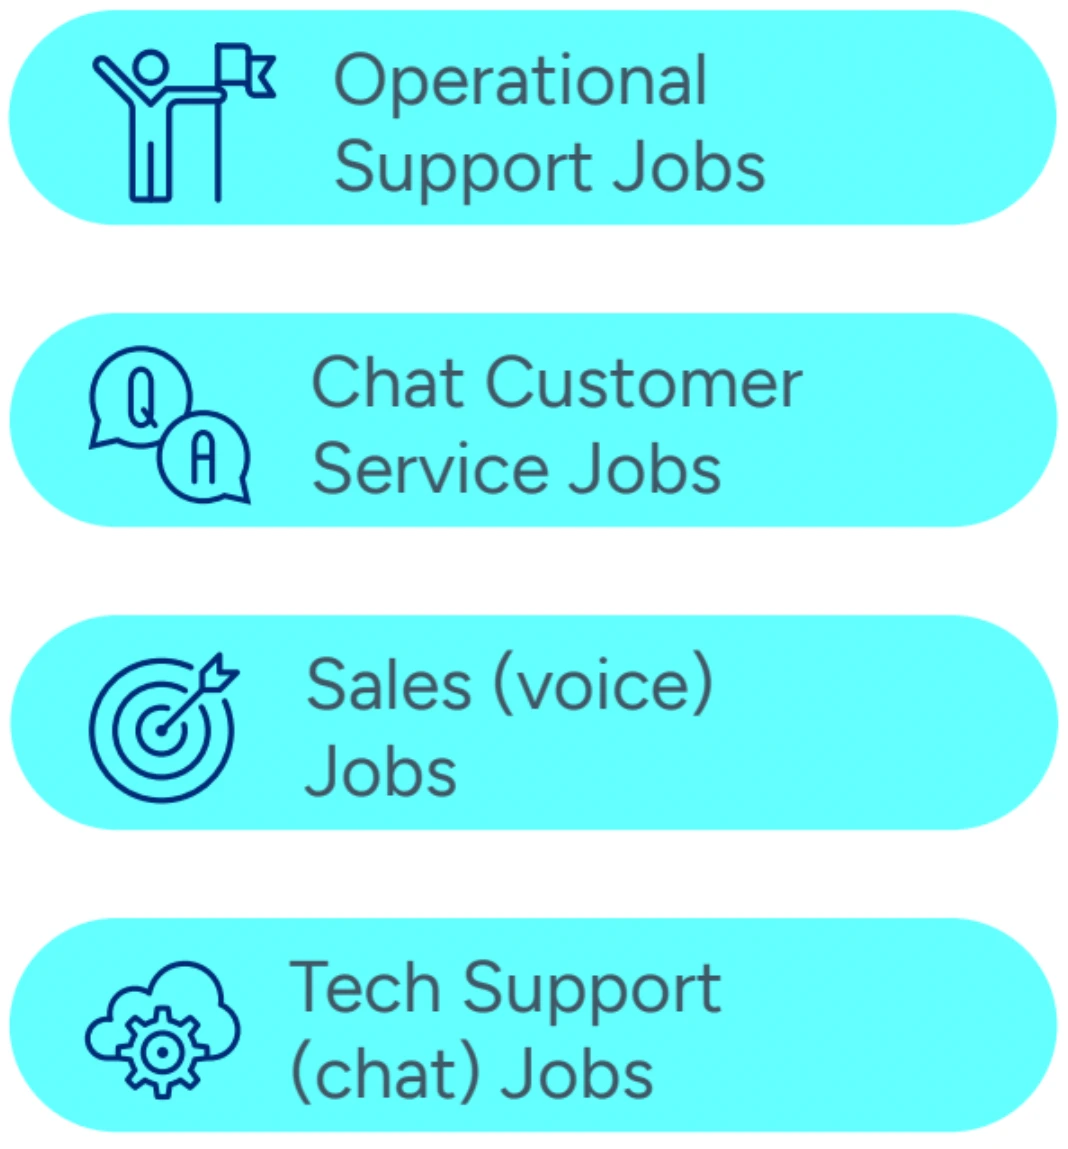 We have operational support, chat customer service, sales (voice), and tech support (chat) job opportunities